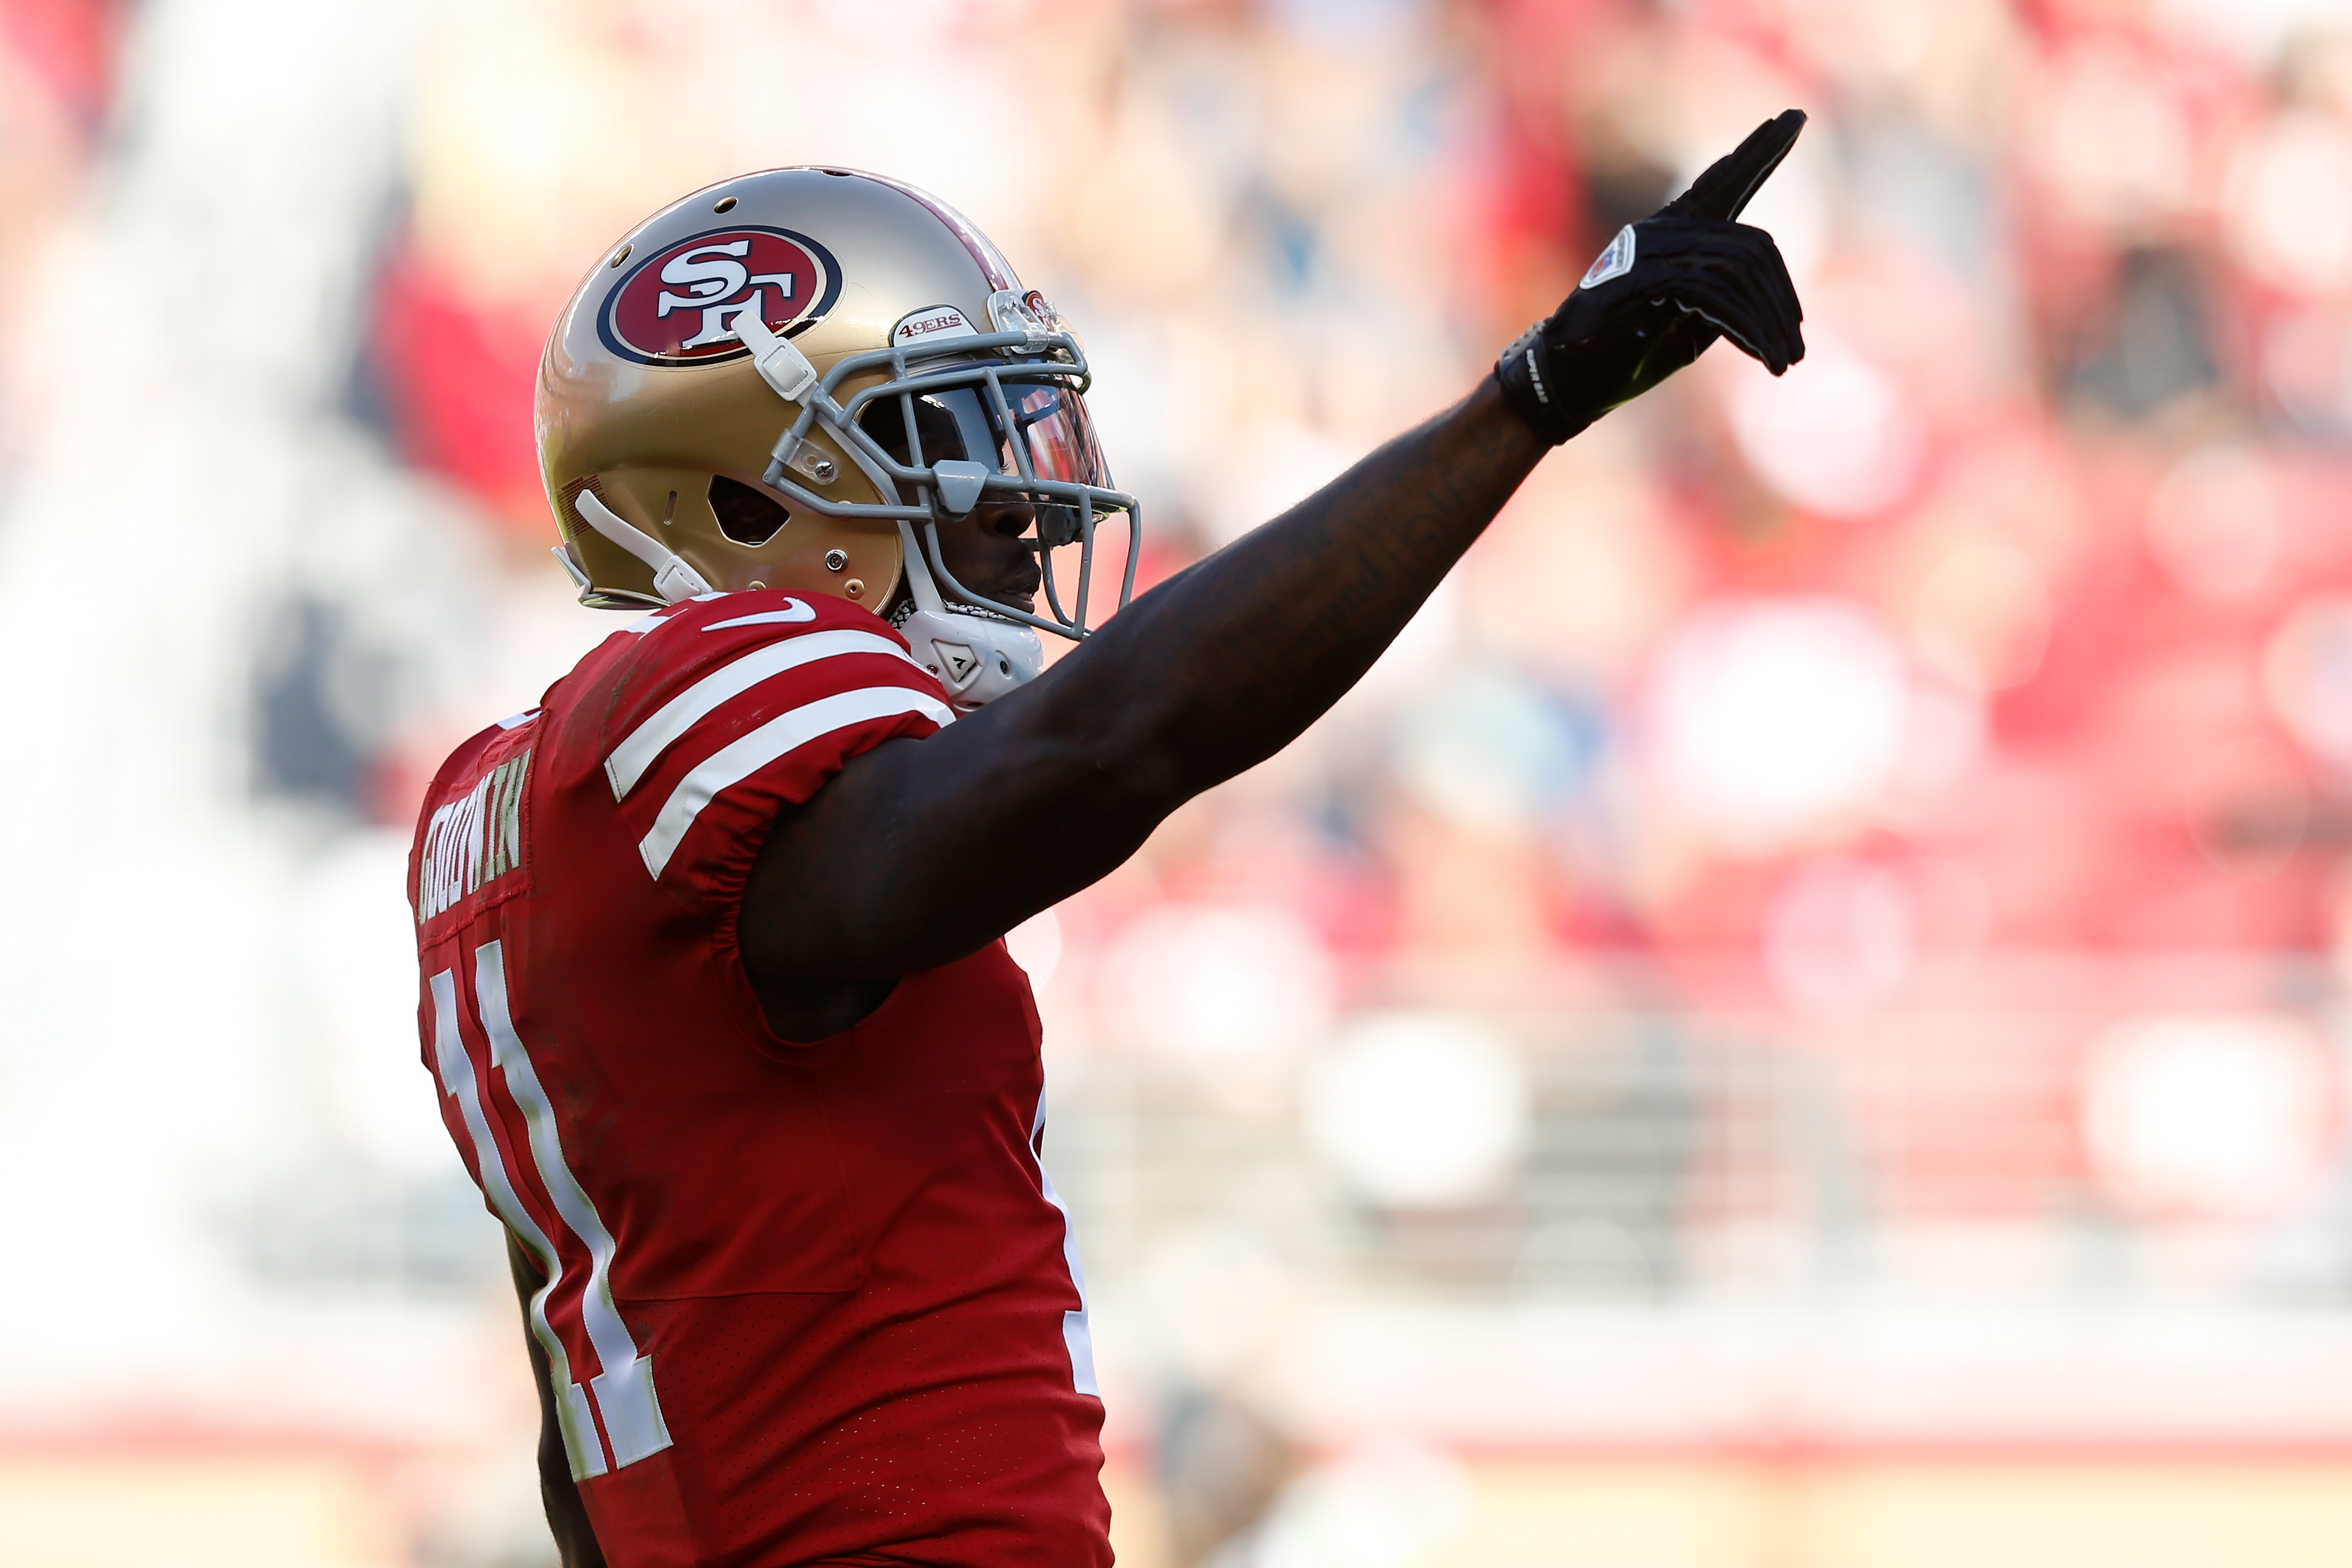 Marquise Goodwin Awarded for Inspirational and Courageous Play in 2017